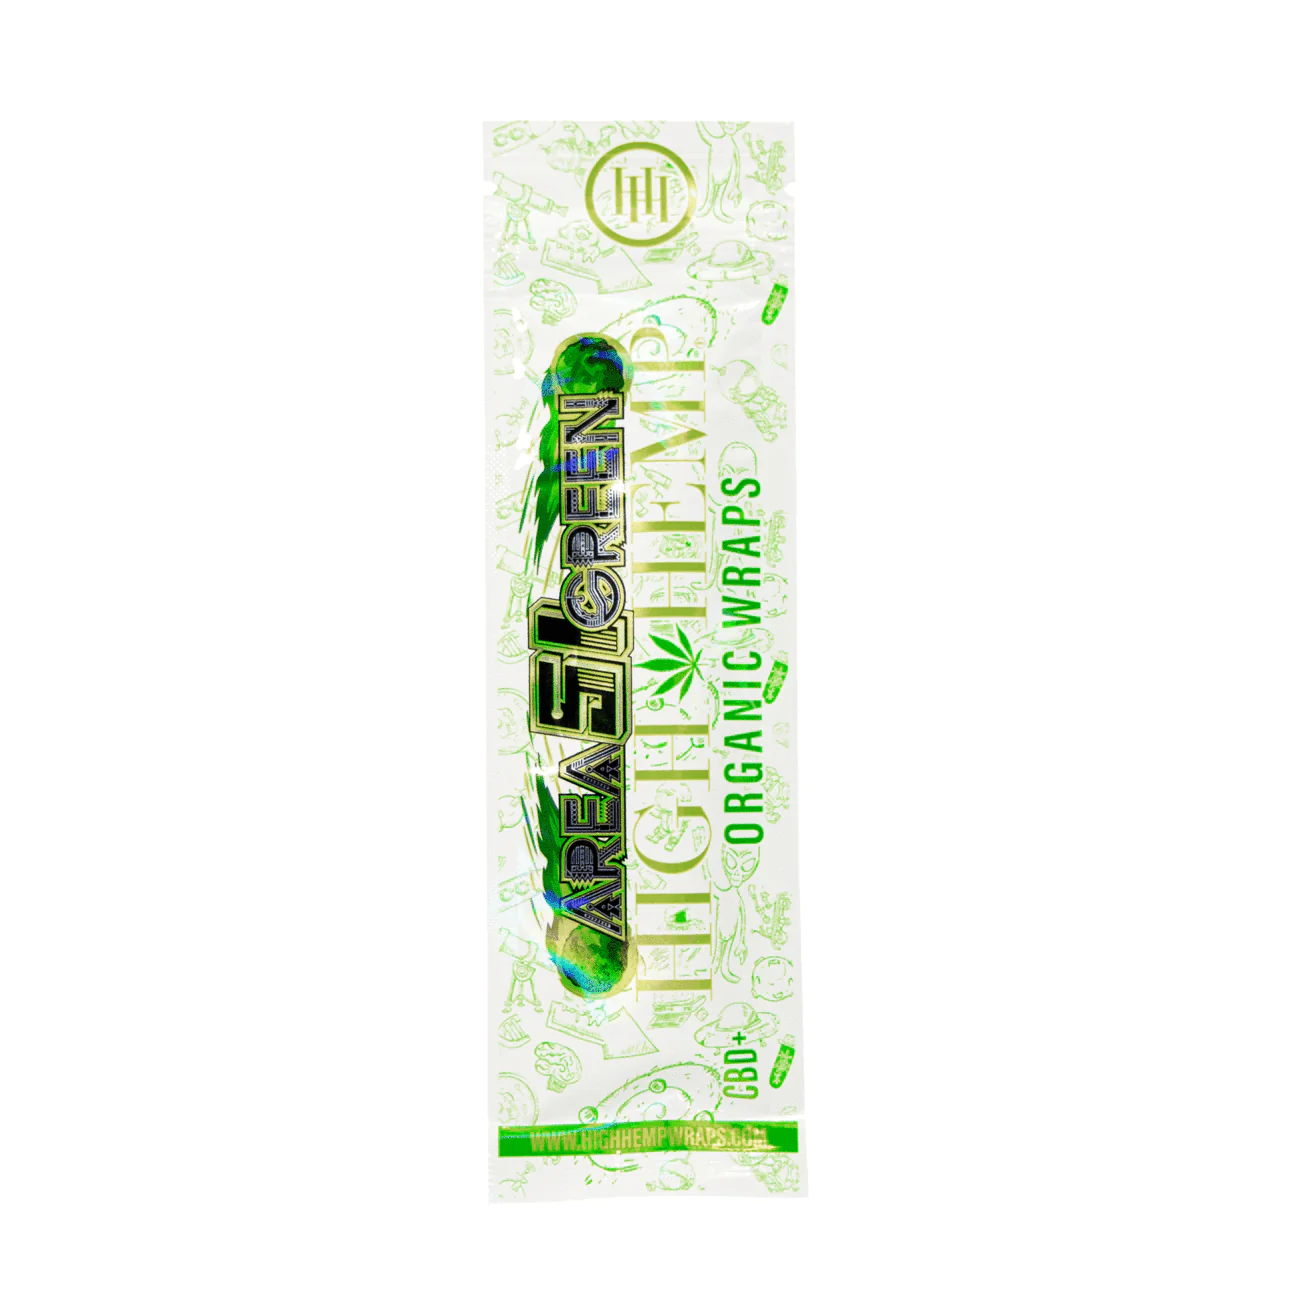 Hemp Leaf Wraps: A Natural Twist to Your Smoking Experience